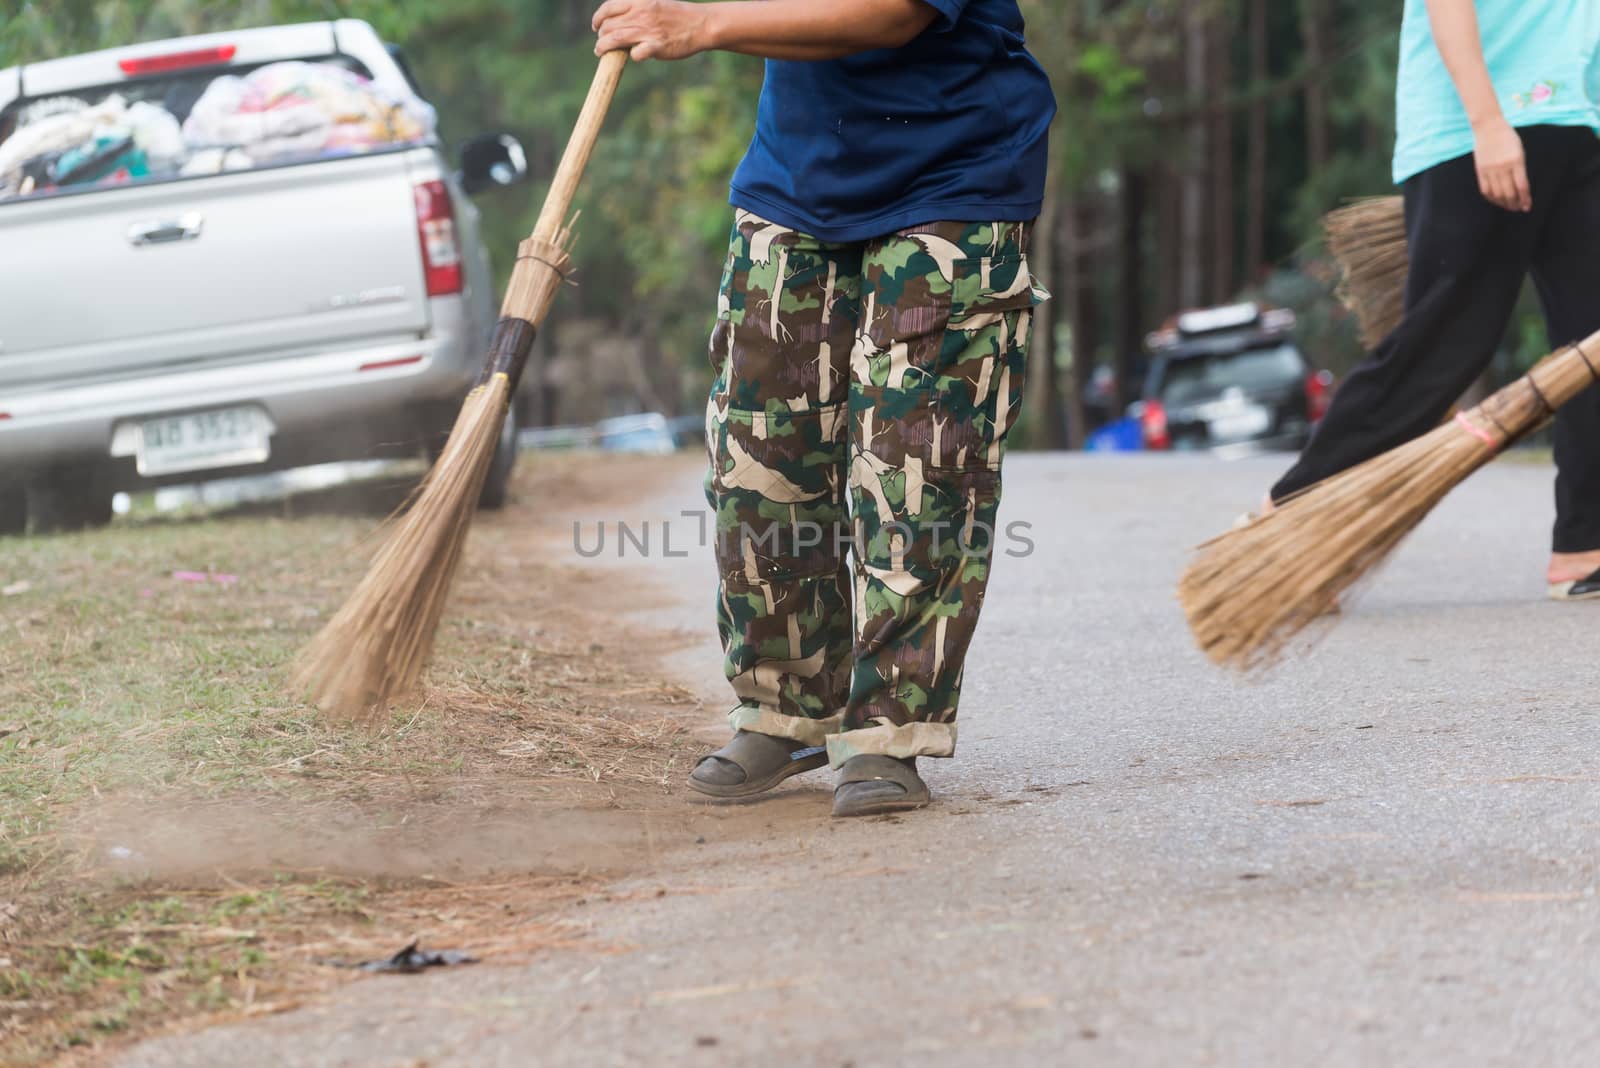 Street Sweeper Sweeping Pavement by Soranop01